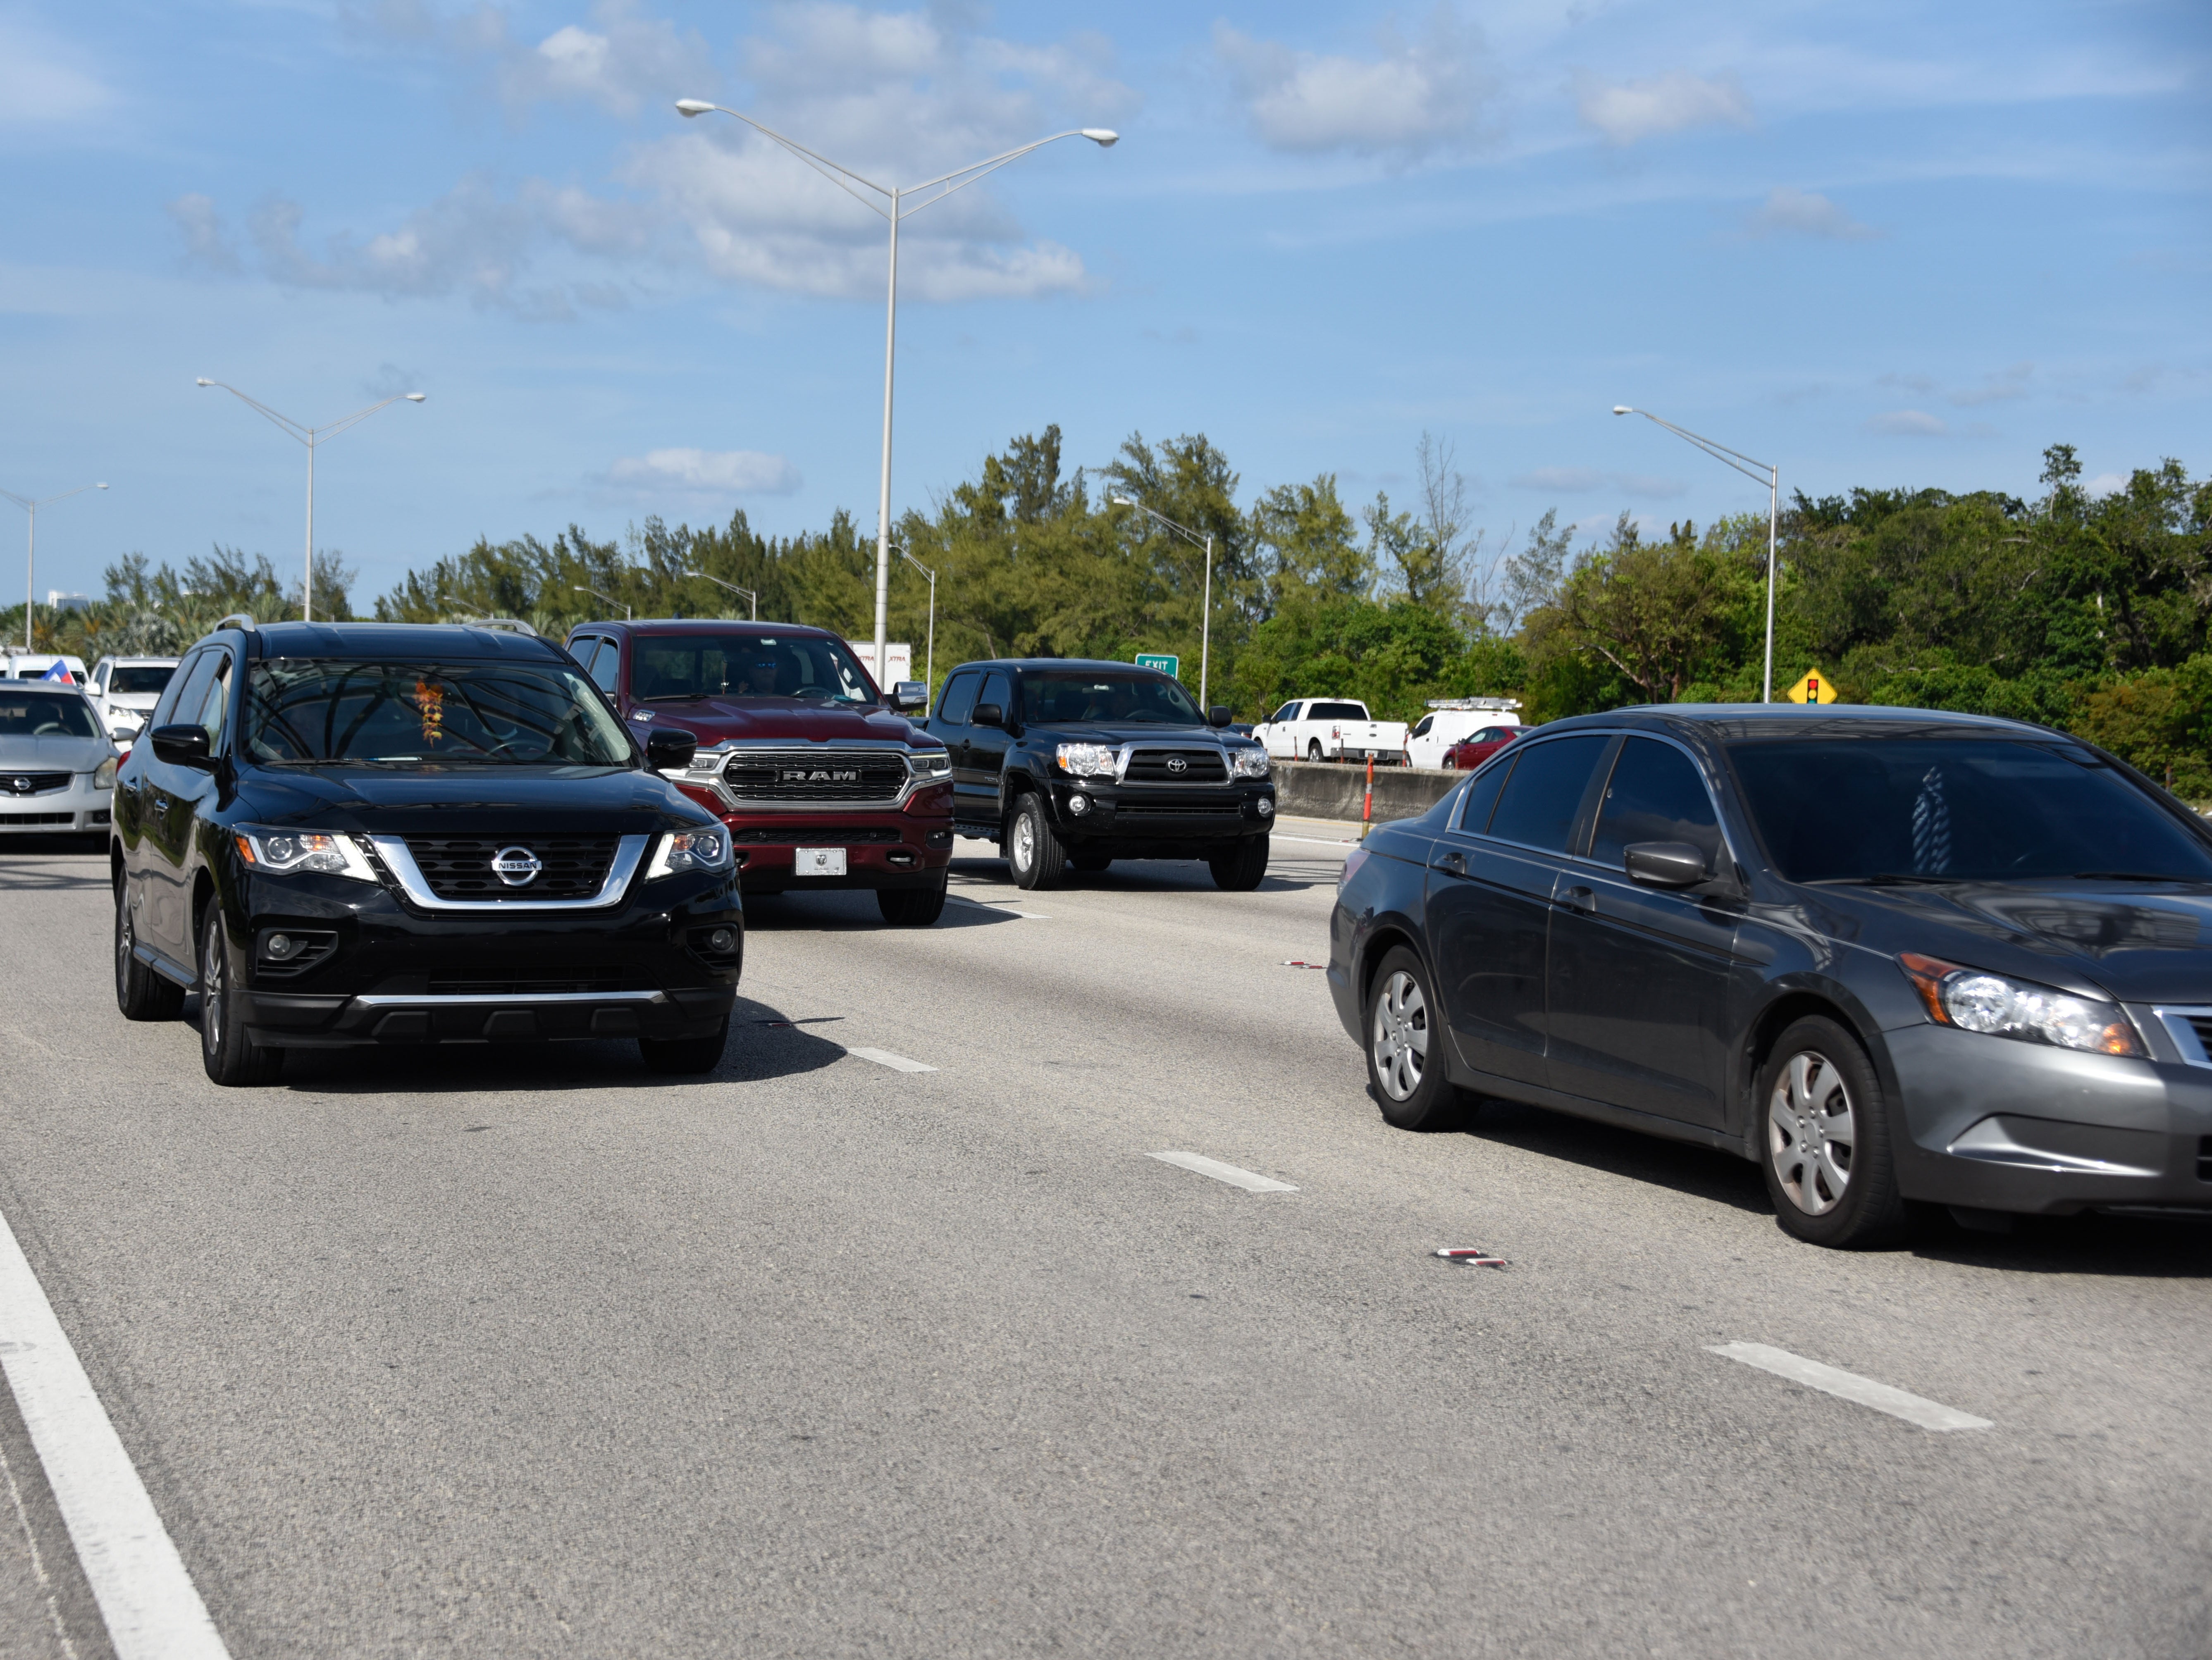 Cars on Interstate 95 in Florida